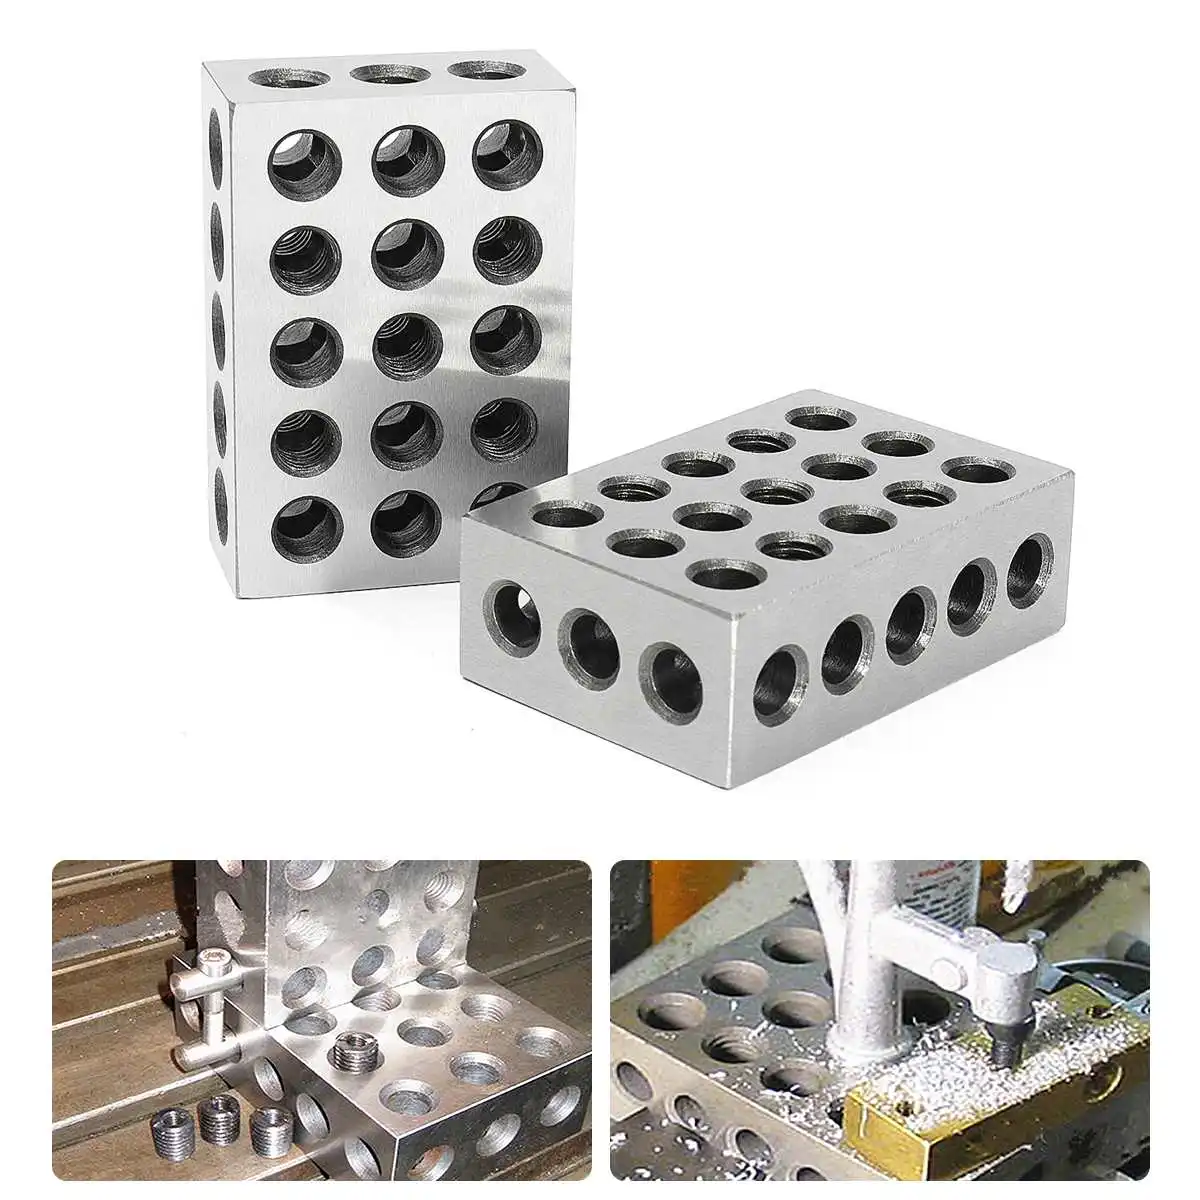 2Pcs Hardened Steel Block 23 Holes Parallel Clamping Block Lathe Tools Precision 0.005mm for Machine Tool 1 x 2 x 3inch